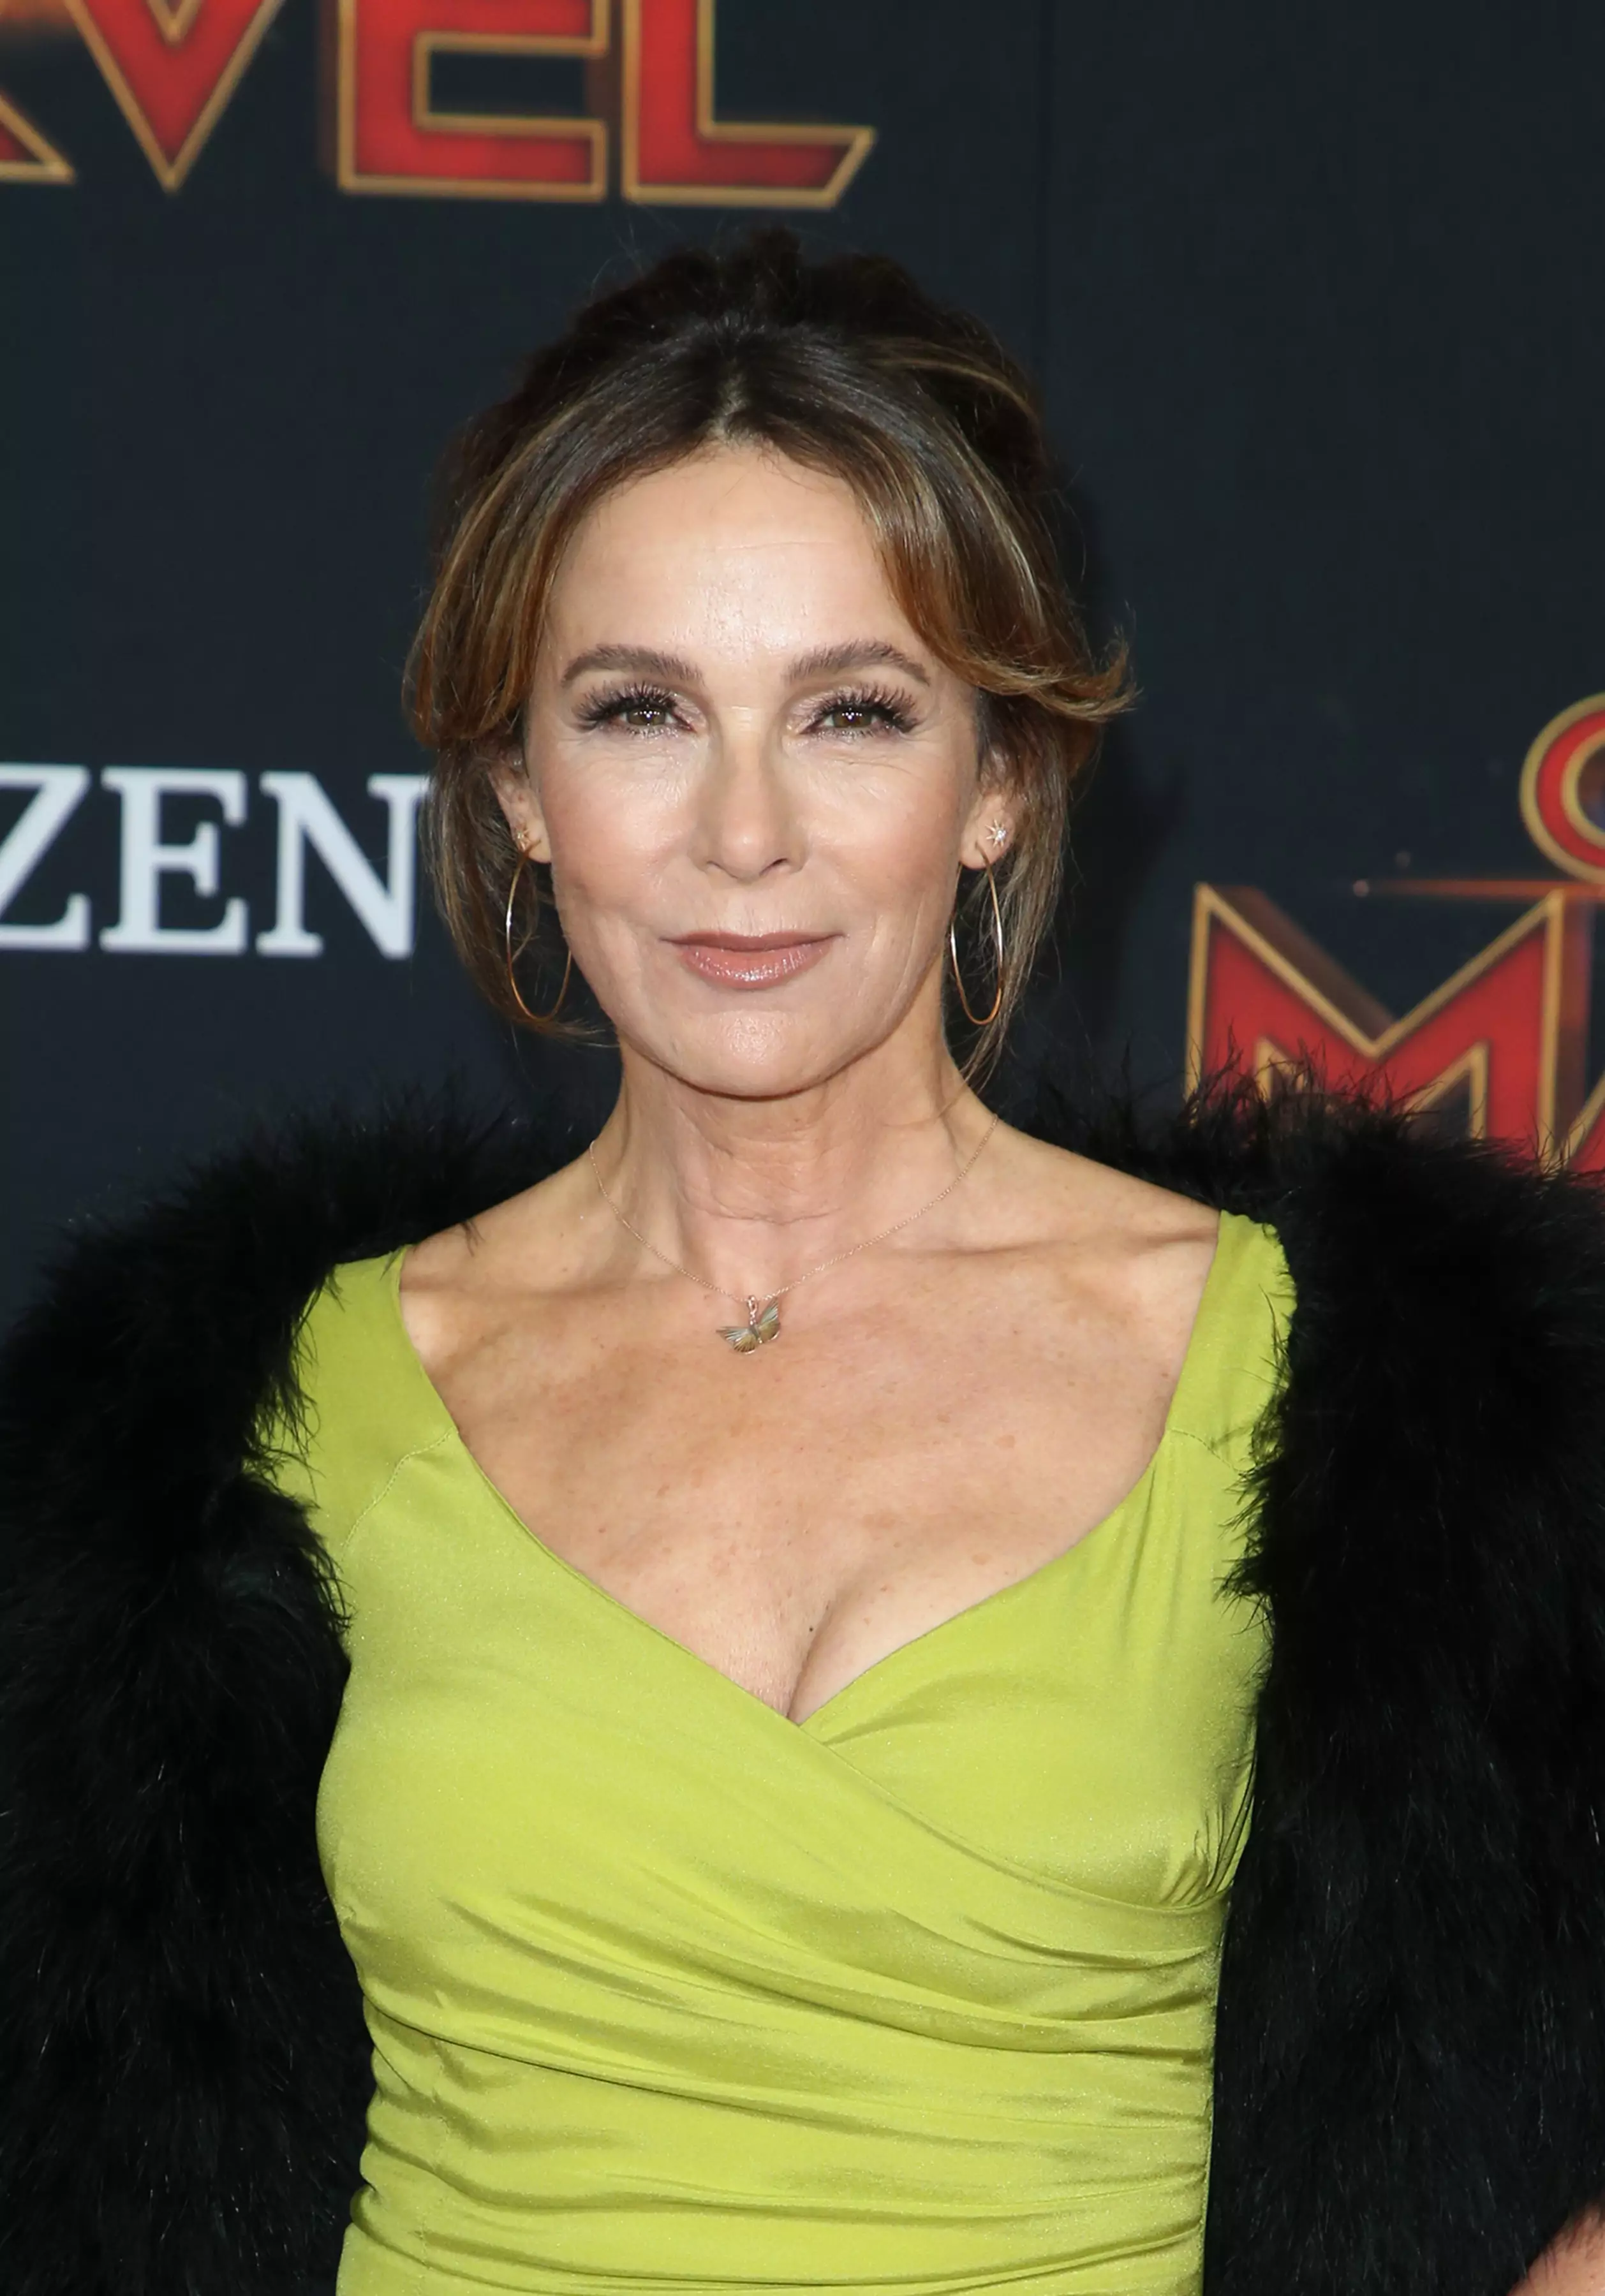 Jennifer Grey is working on the untitled movie (